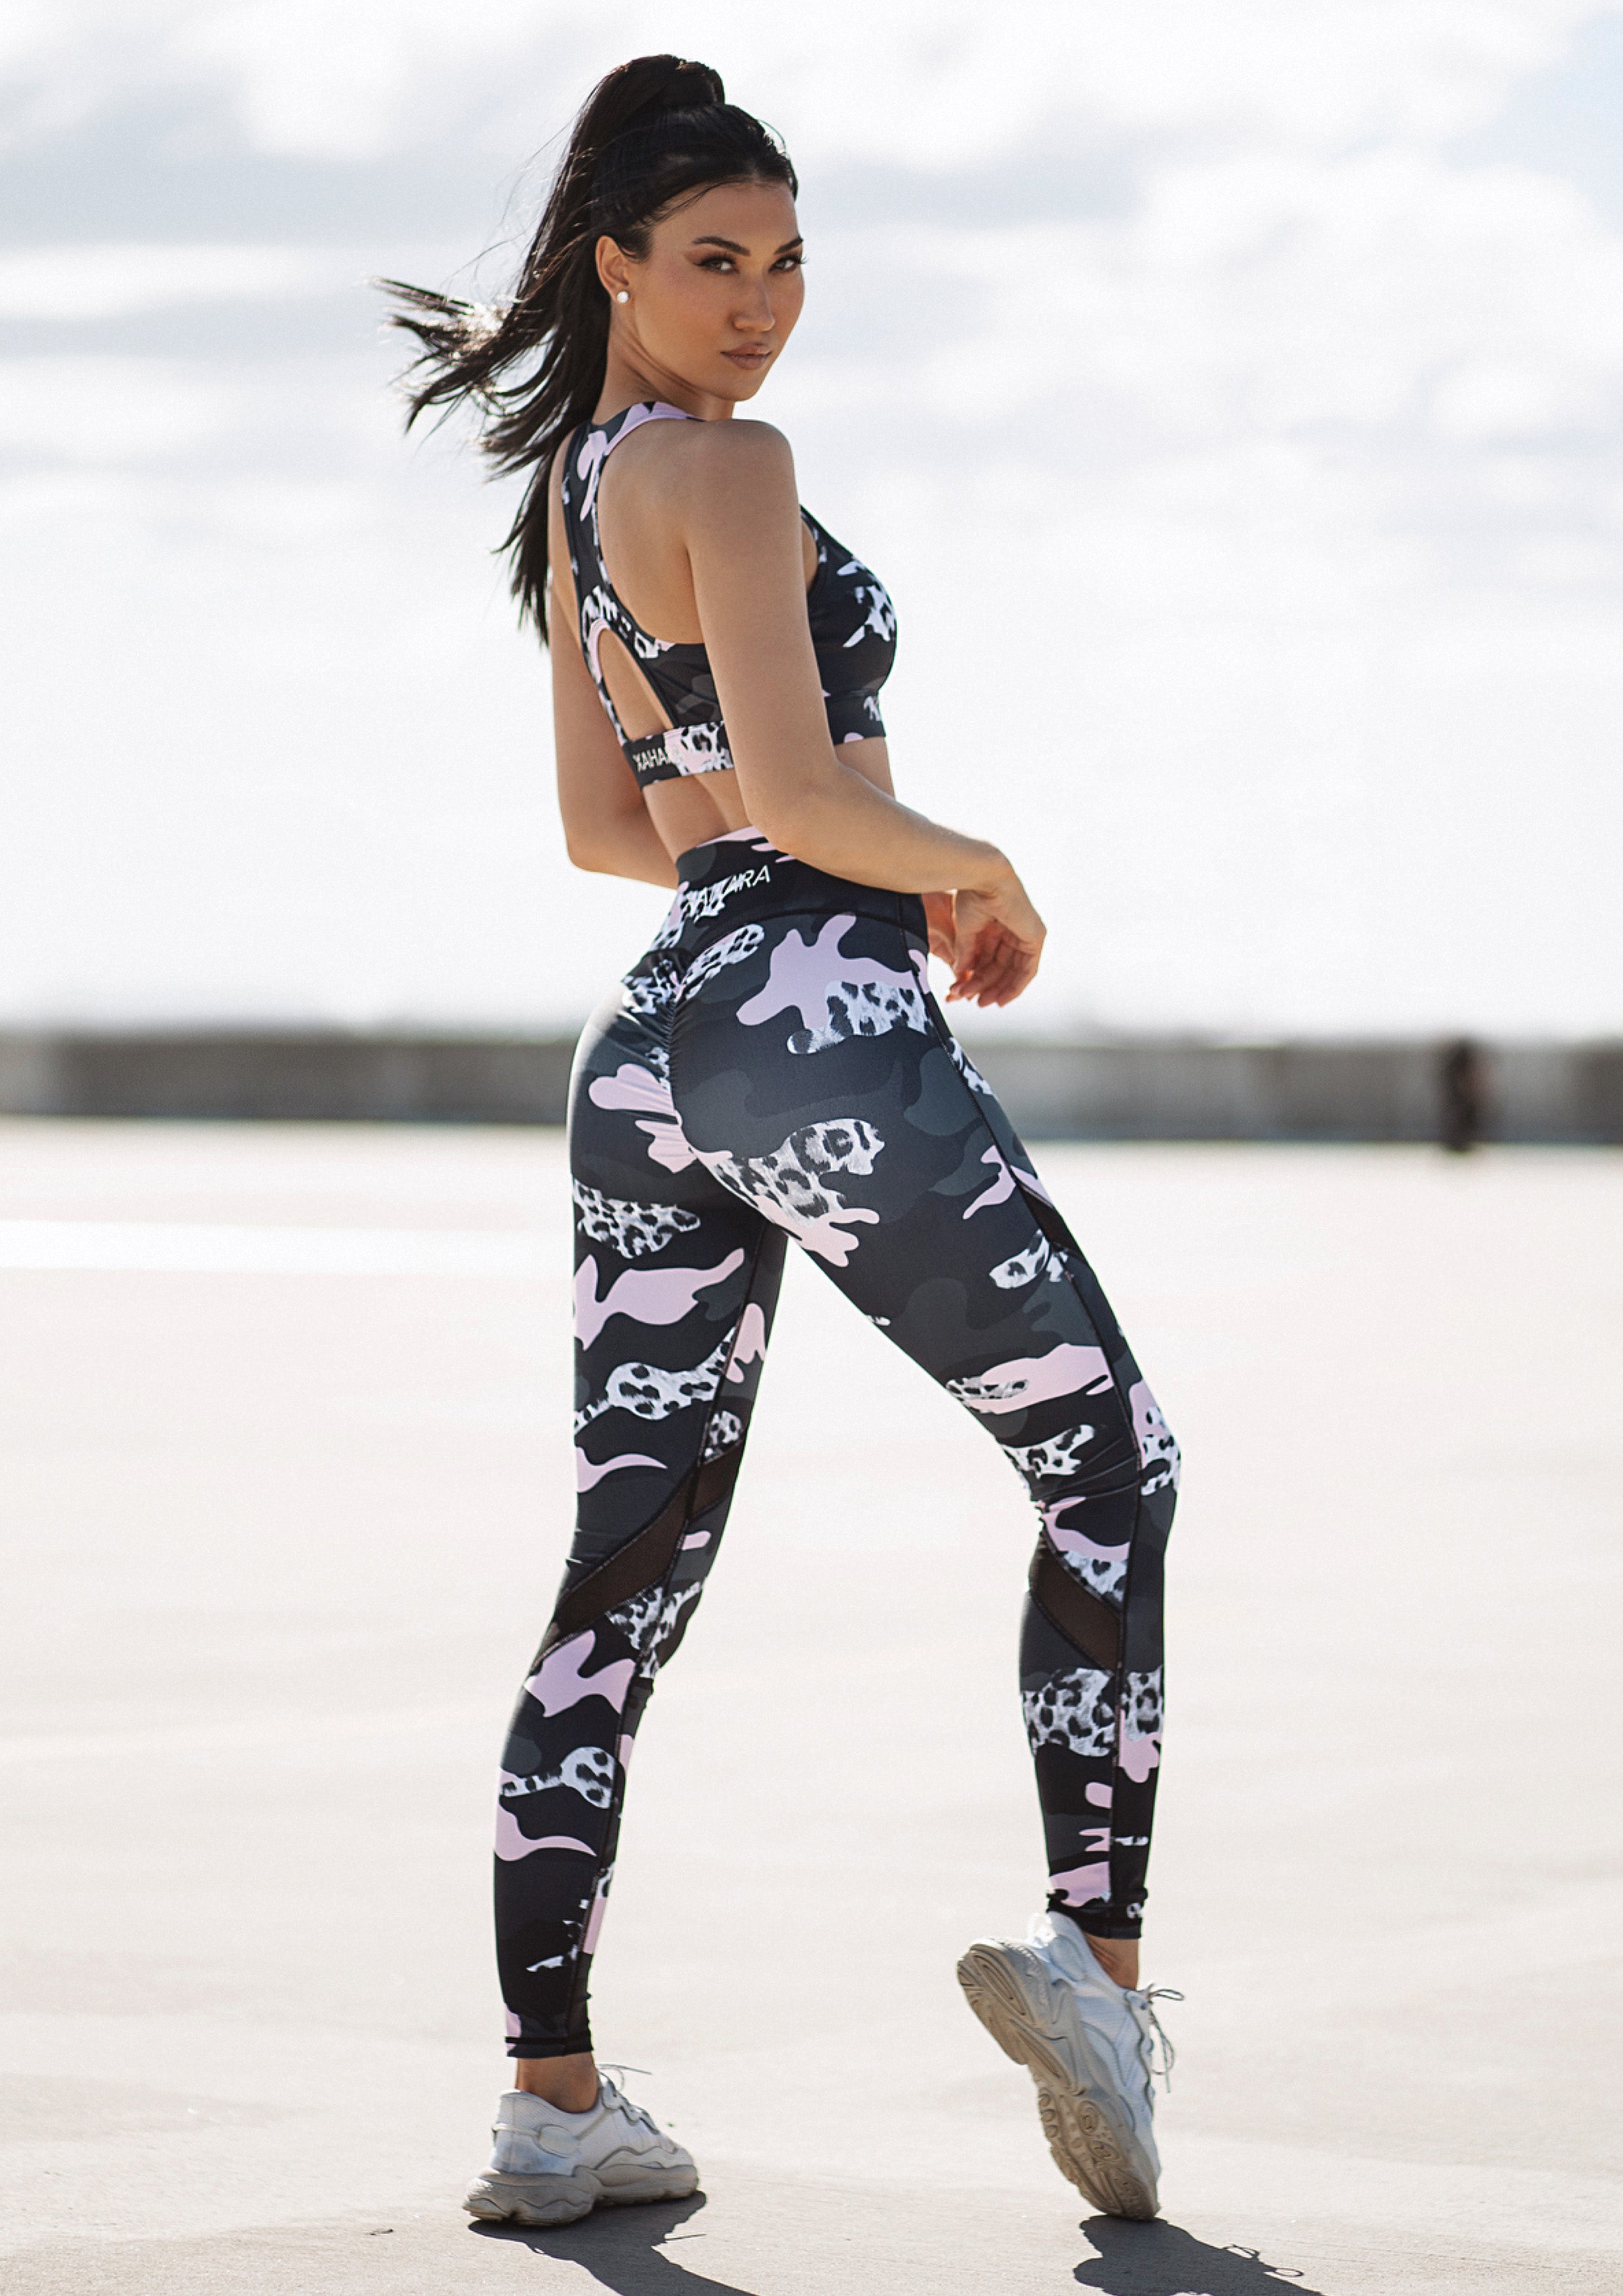 Womens Leggings | Pink Camouflage Capri Leggings | Footless Tights |  No-Roll Waistband